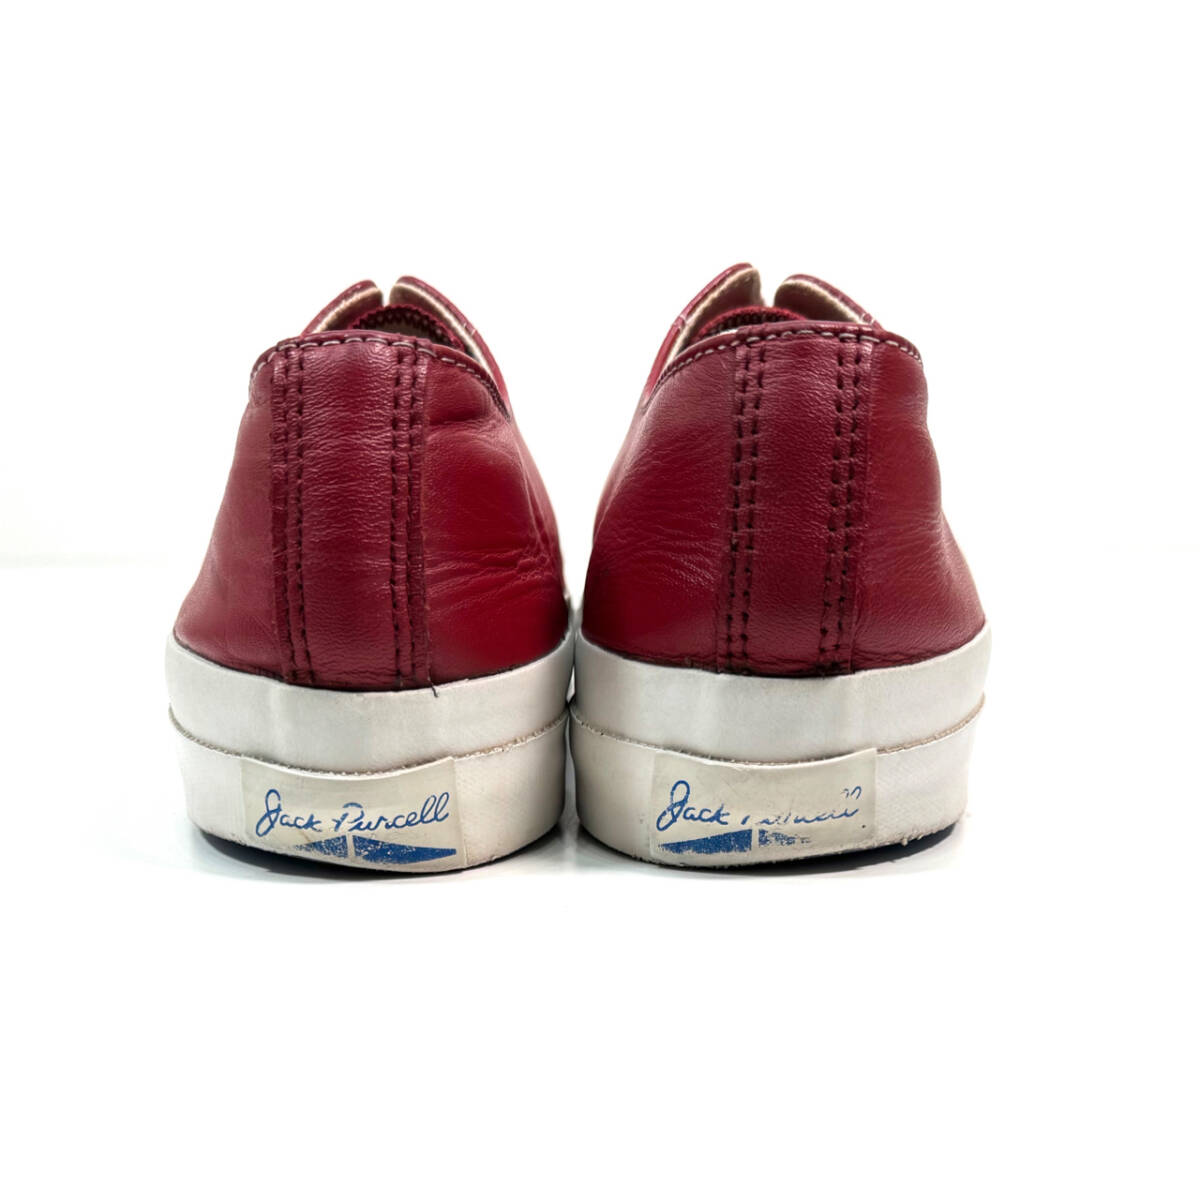 USA製 1990s CONVERSE LEATHER JACK PURCELL US9(27.5cm) Red ヴィンテージコンバース レザーシューズ スニーカー ジャックパーセル 赤_画像4